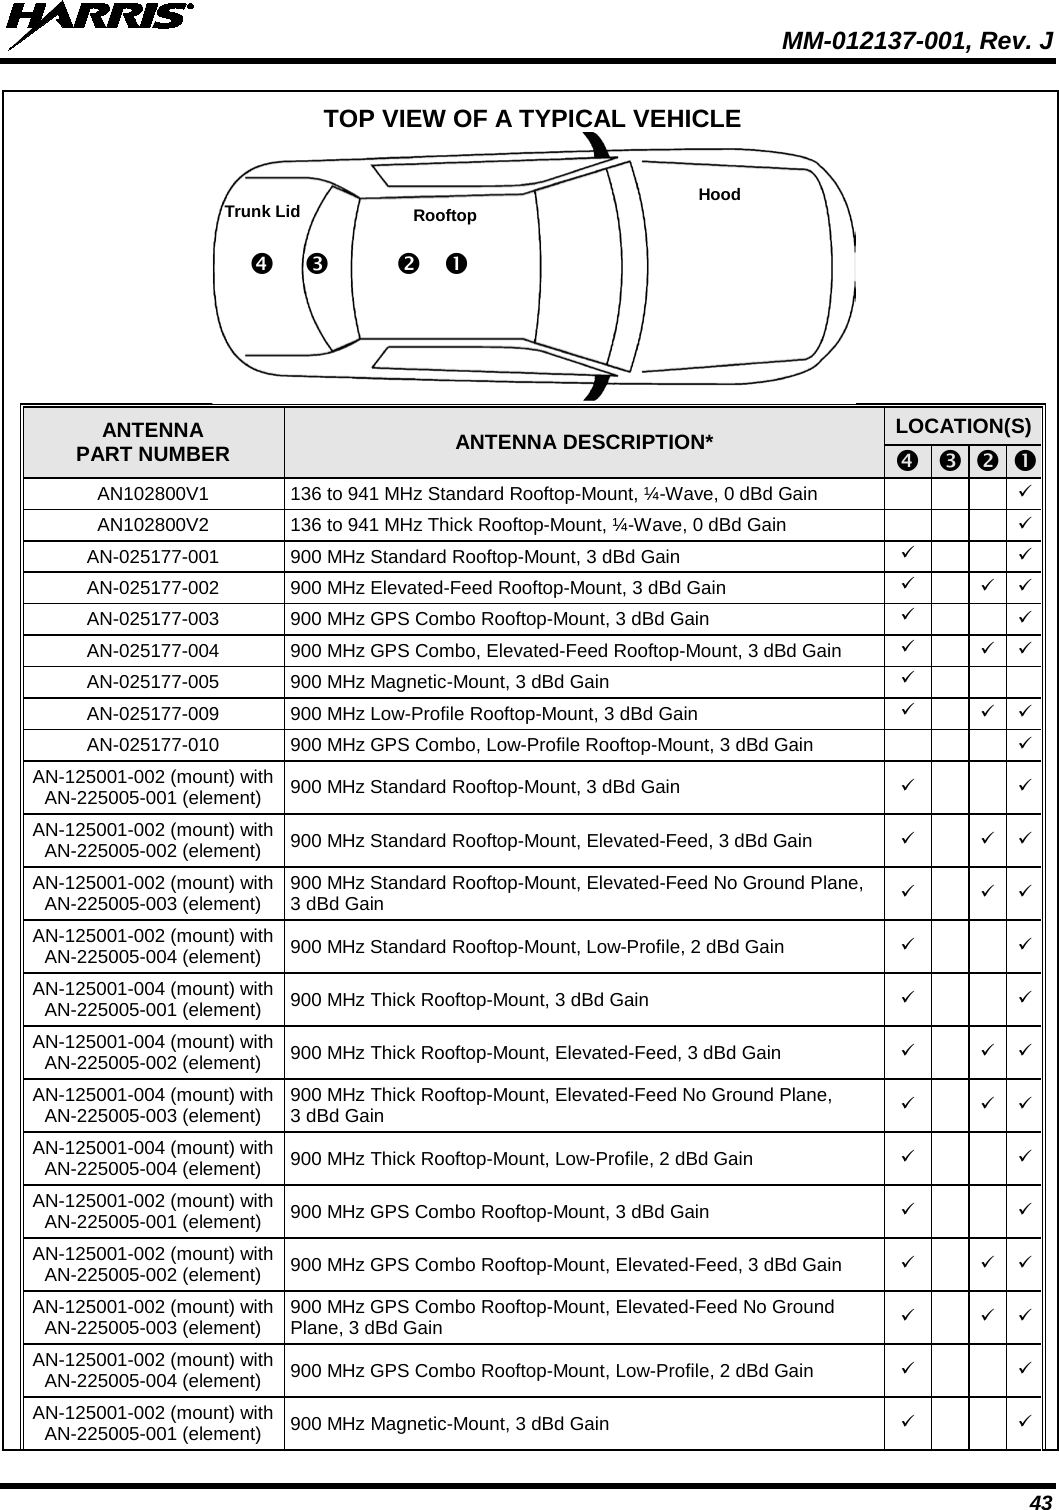  MM-012137-001, Rev. J 43  TOP VIEW OF A TYPICAL VEHICLE    ANTENNA PART NUMBER ANTENNA DESCRIPTION*  LOCATION(S)         AN102800V1 136 to 941 MHz Standard Rooftop-Mount, ¼-Wave, 0 dBd Gain         AN102800V2 136 to 941 MHz Thick Rooftop-Mount, ¼-Wave, 0 dBd Gain         AN-025177-001 900 MHz Standard Rooftop-Mount, 3 dBd Gain         AN-025177-002  900 MHz Elevated-Feed Rooftop-Mount, 3 dBd Gain       AN-025177-003  900 MHz GPS Combo Rooftop-Mount, 3 dBd Gain         AN-025177-004  900 MHz GPS Combo, Elevated-Feed Rooftop-Mount, 3 dBd Gain       AN-025177-005  900 MHz Magnetic-Mount, 3 dBd Gain       AN-025177-009  900 MHz Low-Profile Rooftop-Mount, 3 dBd Gain       AN-025177-010  900 MHz GPS Combo, Low-Profile Rooftop-Mount, 3 dBd Gain         AN-125001-002 (mount) with AN-225005-001 (element) 900 MHz Standard Rooftop-Mount, 3 dBd Gain         AN-125001-002 (mount) with AN-225005-002 (element) 900 MHz Standard Rooftop-Mount, Elevated-Feed, 3 dBd Gain       AN-125001-002 (mount) with AN-225005-003 (element) 900 MHz Standard Rooftop-Mount, Elevated-Feed No Ground Plane, 3 dBd Gain       AN-125001-002 (mount) with AN-225005-004 (element) 900 MHz Standard Rooftop-Mount, Low-Profile, 2 dBd Gain         AN-125001-004 (mount) with AN-225005-001 (element) 900 MHz Thick Rooftop-Mount, 3 dBd Gain         AN-125001-004 (mount) with AN-225005-002 (element) 900 MHz Thick Rooftop-Mount, Elevated-Feed, 3 dBd Gain       AN-125001-004 (mount) with AN-225005-003 (element) 900 MHz Thick Rooftop-Mount, Elevated-Feed No Ground Plane, 3 dBd Gain       AN-125001-004 (mount) with AN-225005-004 (element) 900 MHz Thick Rooftop-Mount, Low-Profile, 2 dBd Gain          AN-125001-002 (mount) with AN-225005-001 (element) 900 MHz GPS Combo Rooftop-Mount, 3 dBd Gain          AN-125001-002 (mount) with AN-225005-002 (element) 900 MHz GPS Combo Rooftop-Mount, Elevated-Feed, 3 dBd Gain         AN-125001-002 (mount) with AN-225005-003 (element) 900 MHz GPS Combo Rooftop-Mount, Elevated-Feed No Ground Plane, 3 dBd Gain         AN-125001-002 (mount) with AN-225005-004 (element) 900 MHz GPS Combo Rooftop-Mount, Low-Profile, 2 dBd Gain          AN-125001-002 (mount) with AN-225005-001 (element) 900 MHz Magnetic-Mount, 3 dBd Gain         Trunk Lid Rooftop Hood                      